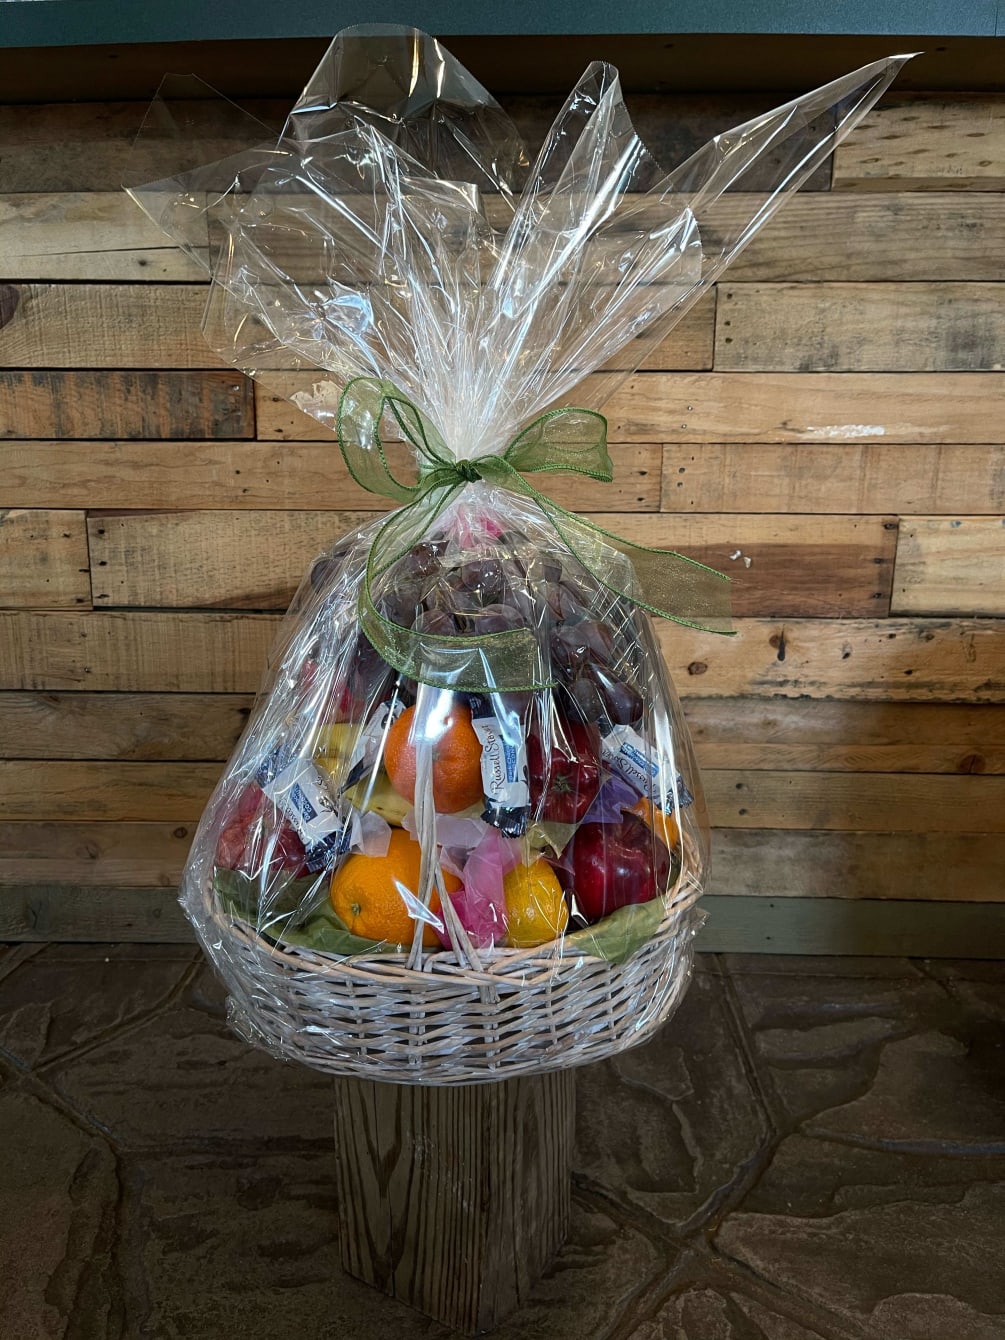 Our fruit basket include fresh fruits and some extra candies!
